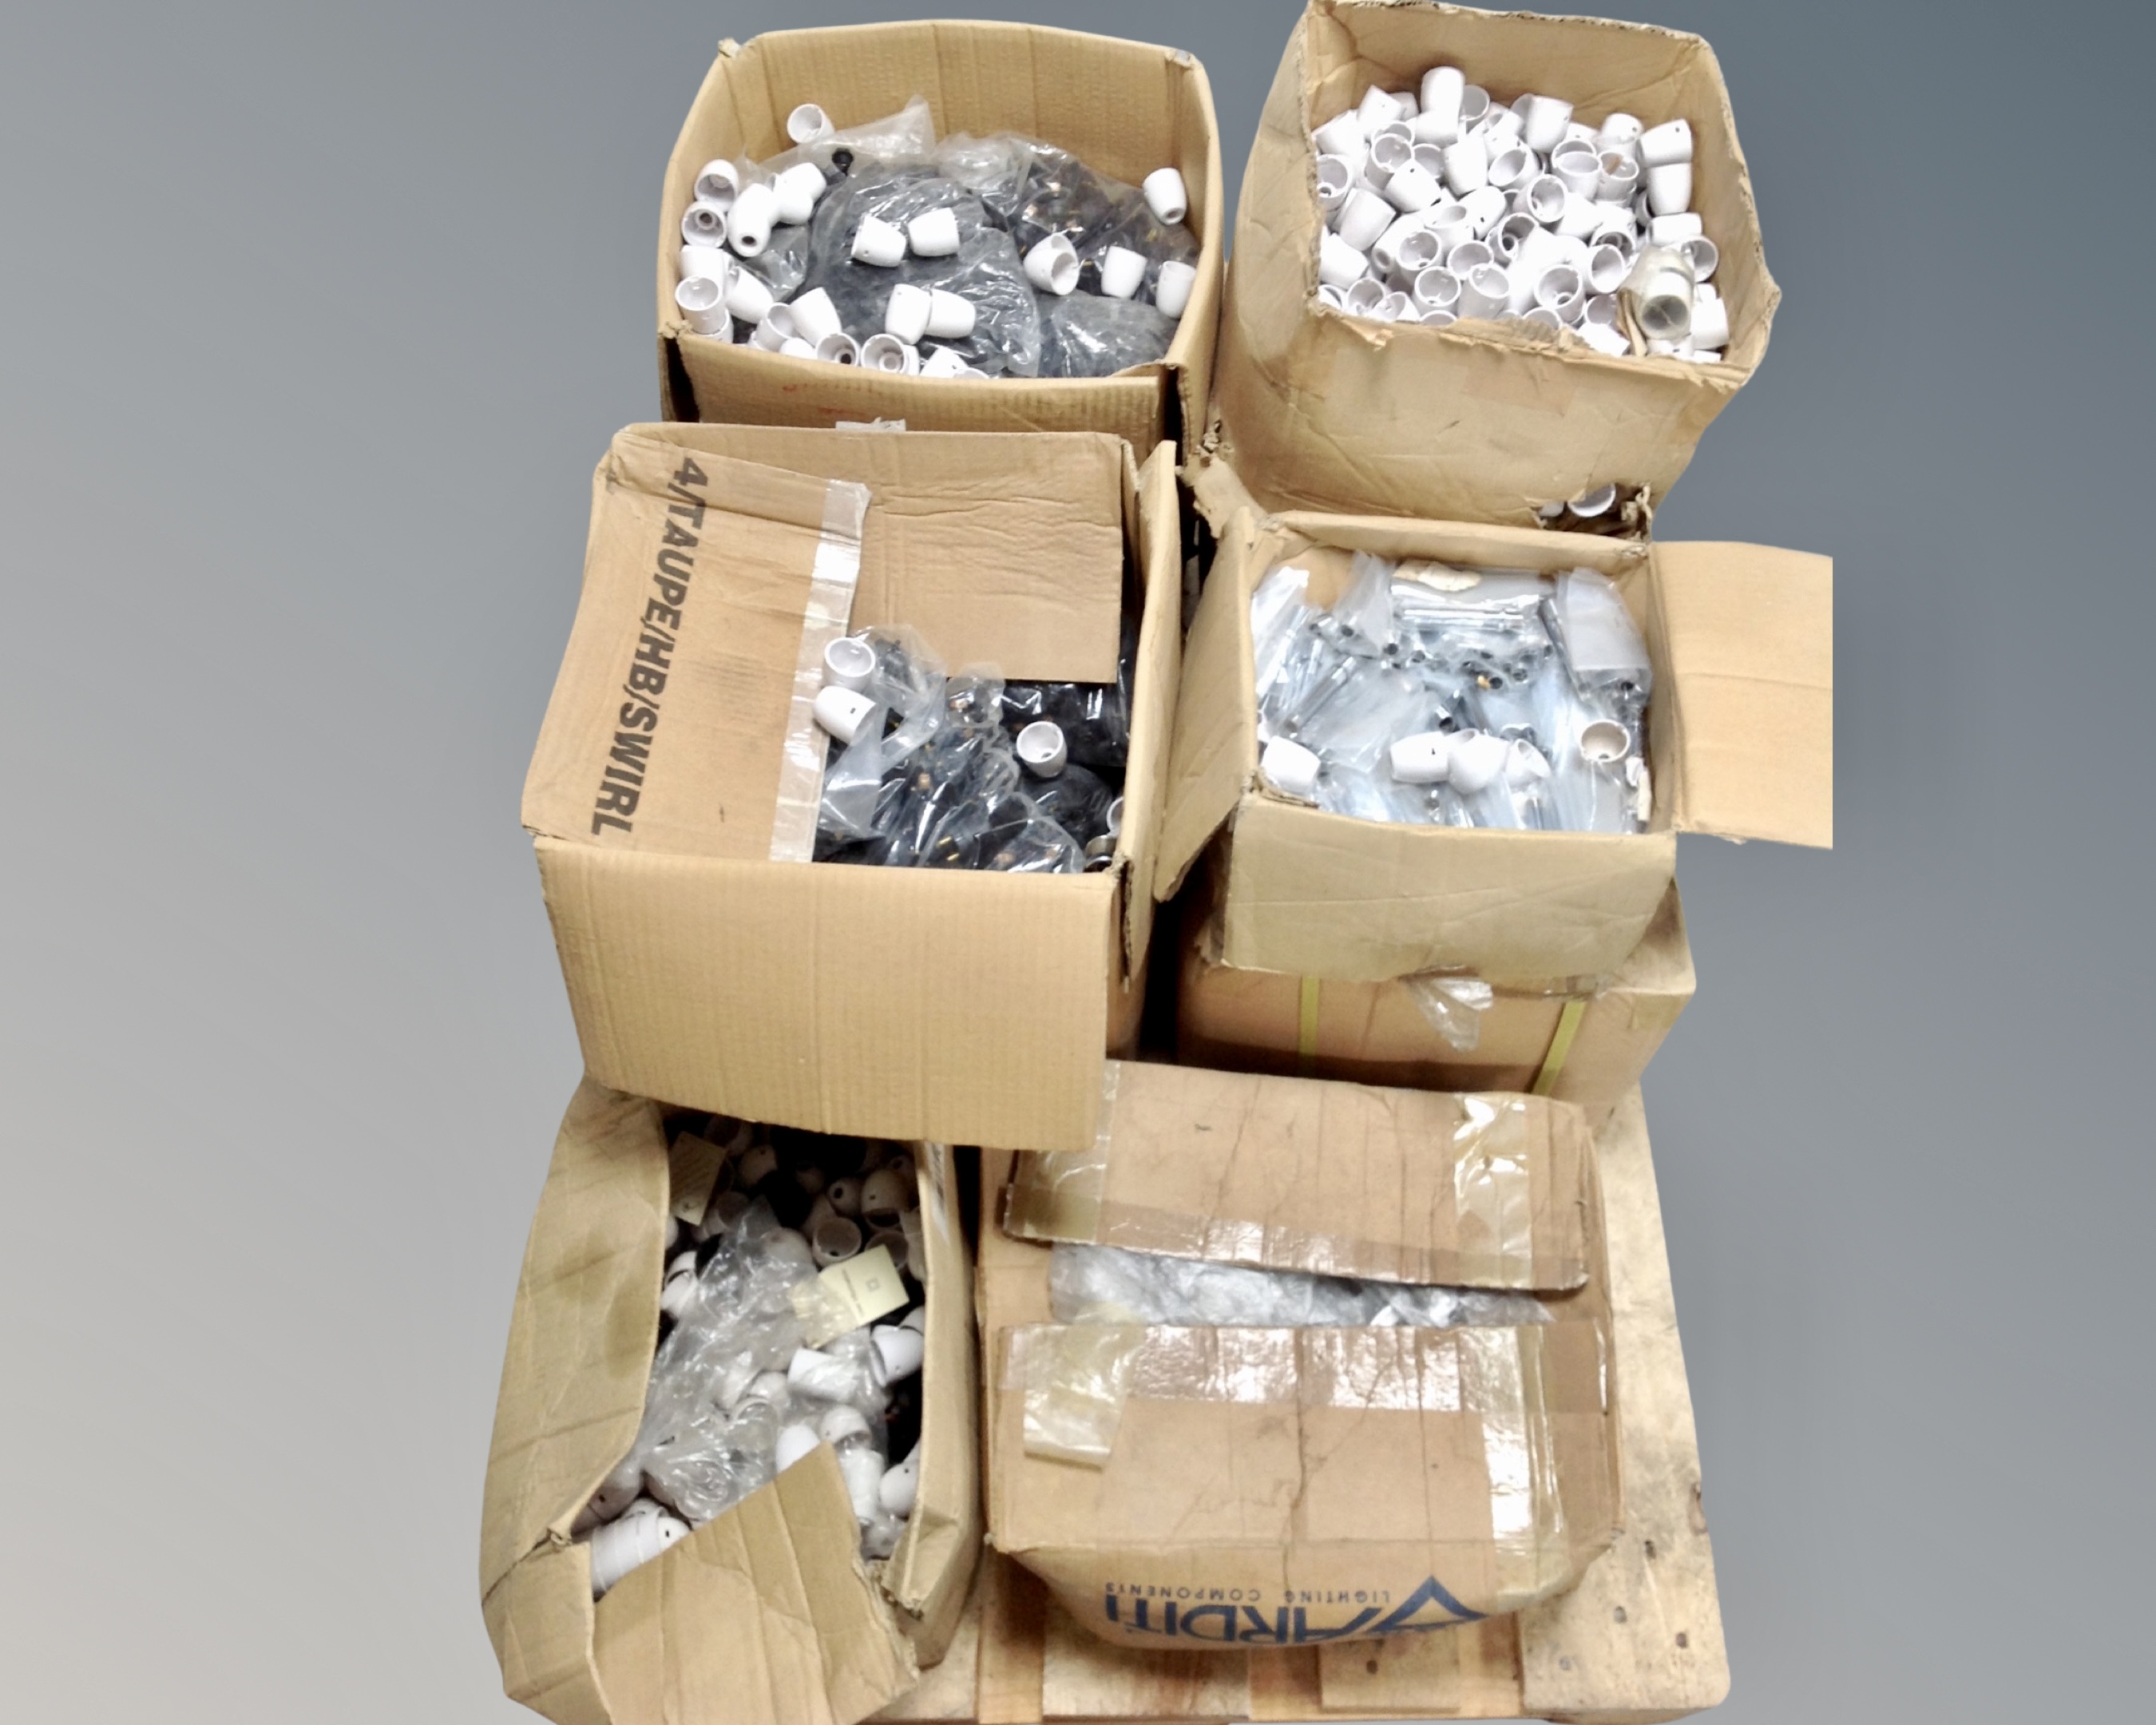 Six boxes of lamp fittings and parts